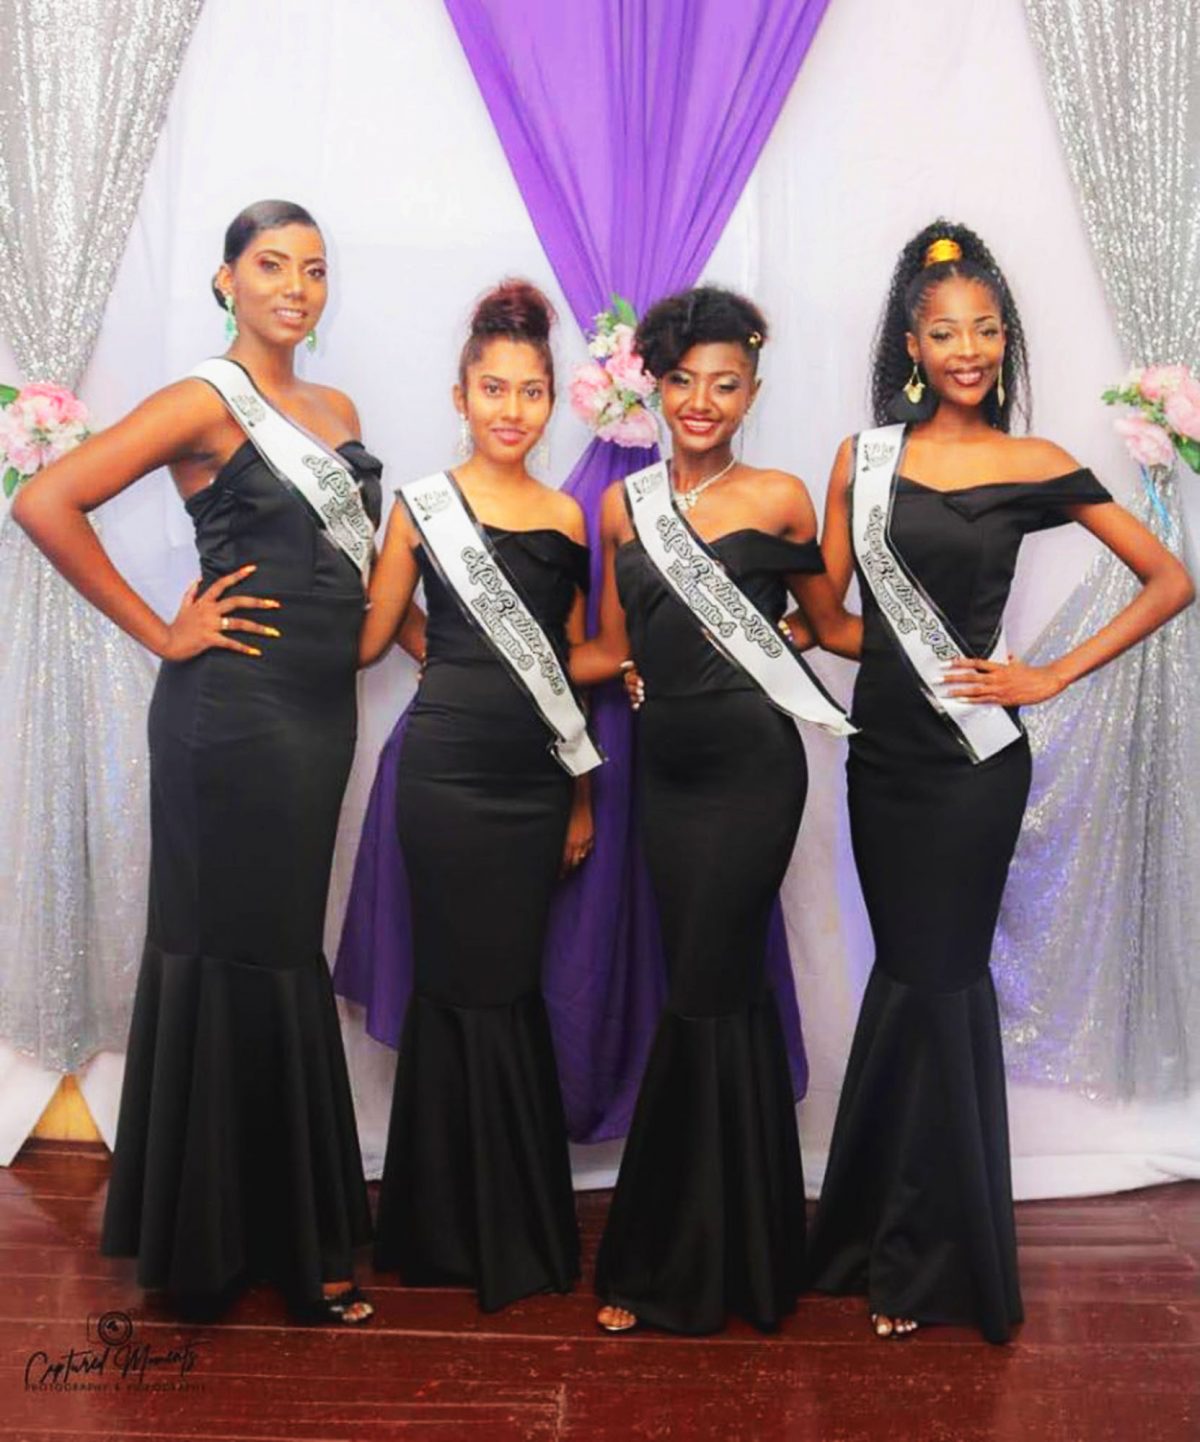 The four delegates who were sashed for the Miss Berbice I’m a Big Deal 2019 Pageant.

